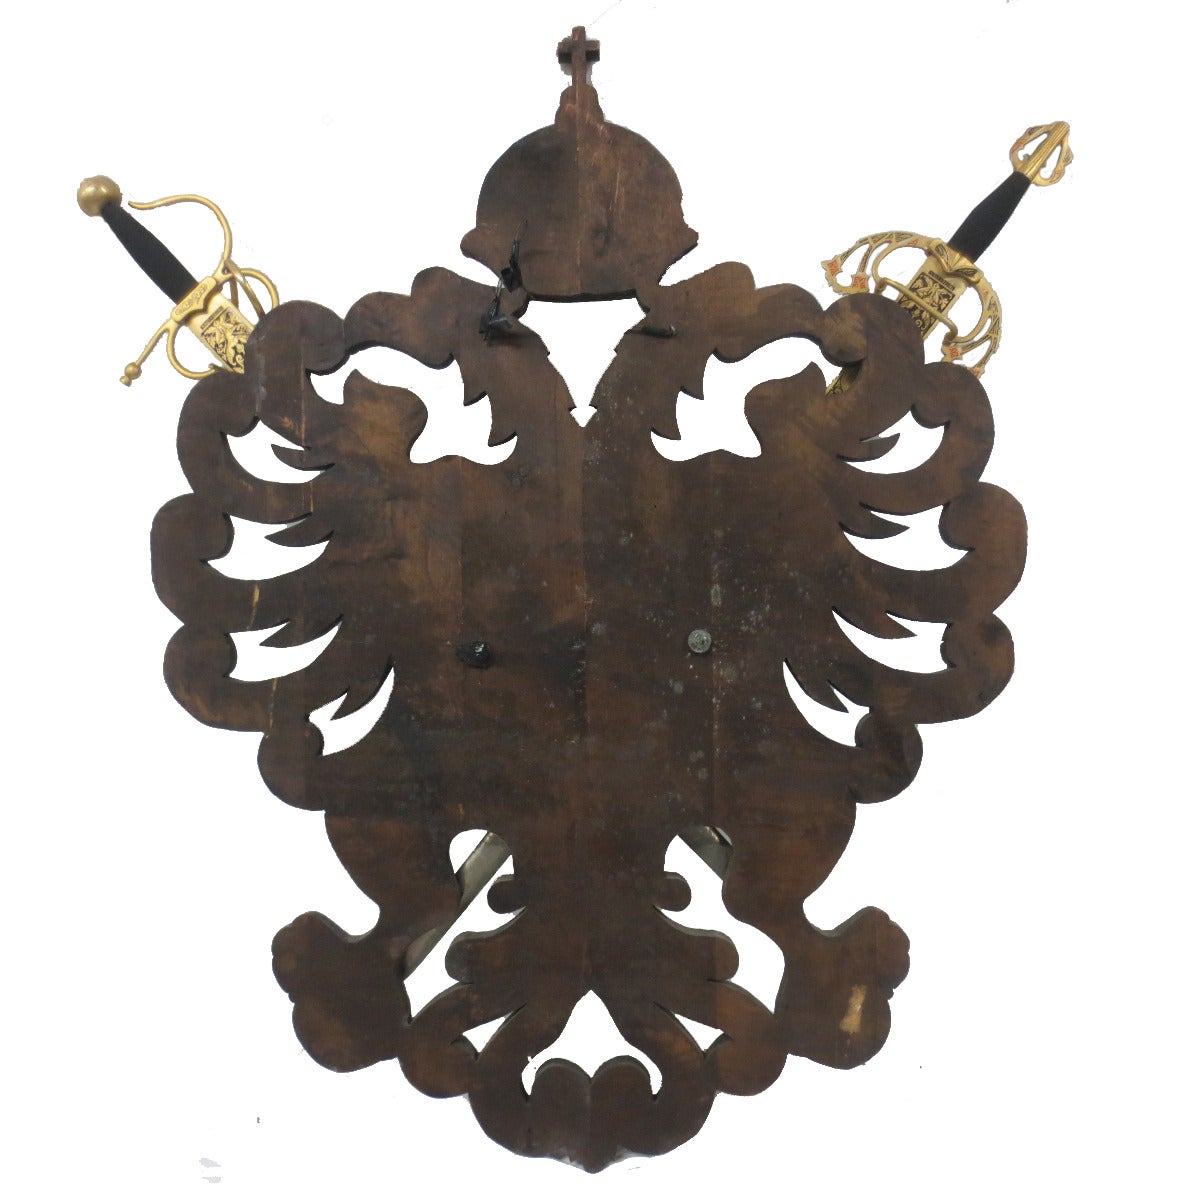 Toledo Spain carved wood wall mounted coat of arms with crown and two winged animals.

Marked 